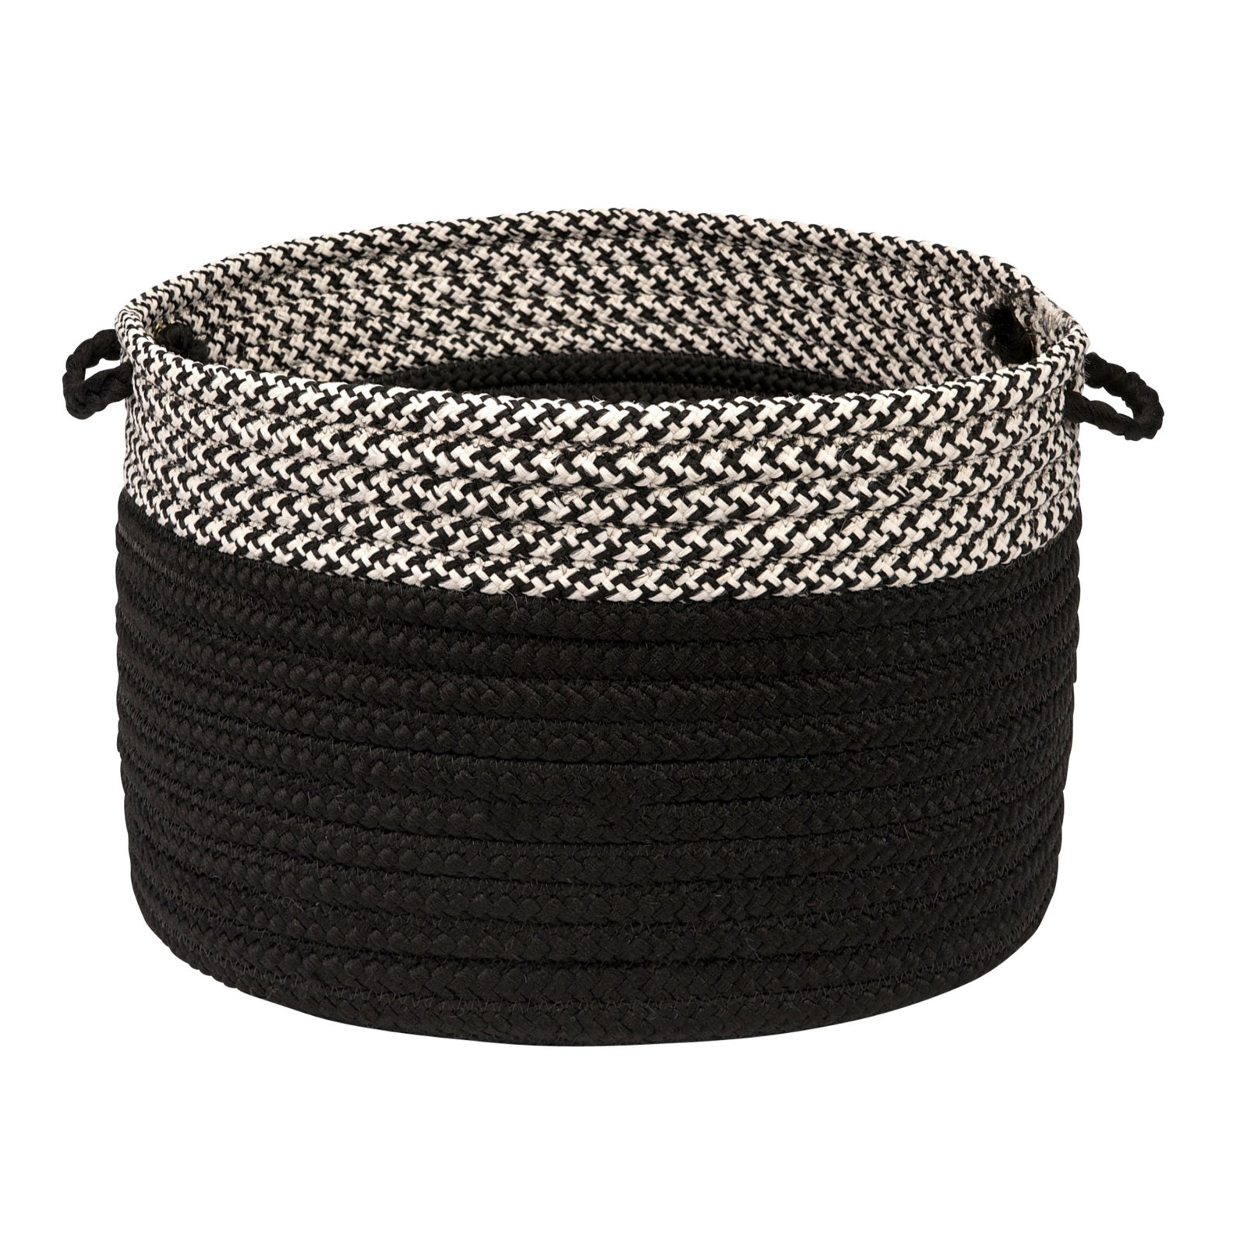 black and white woven basket with handles